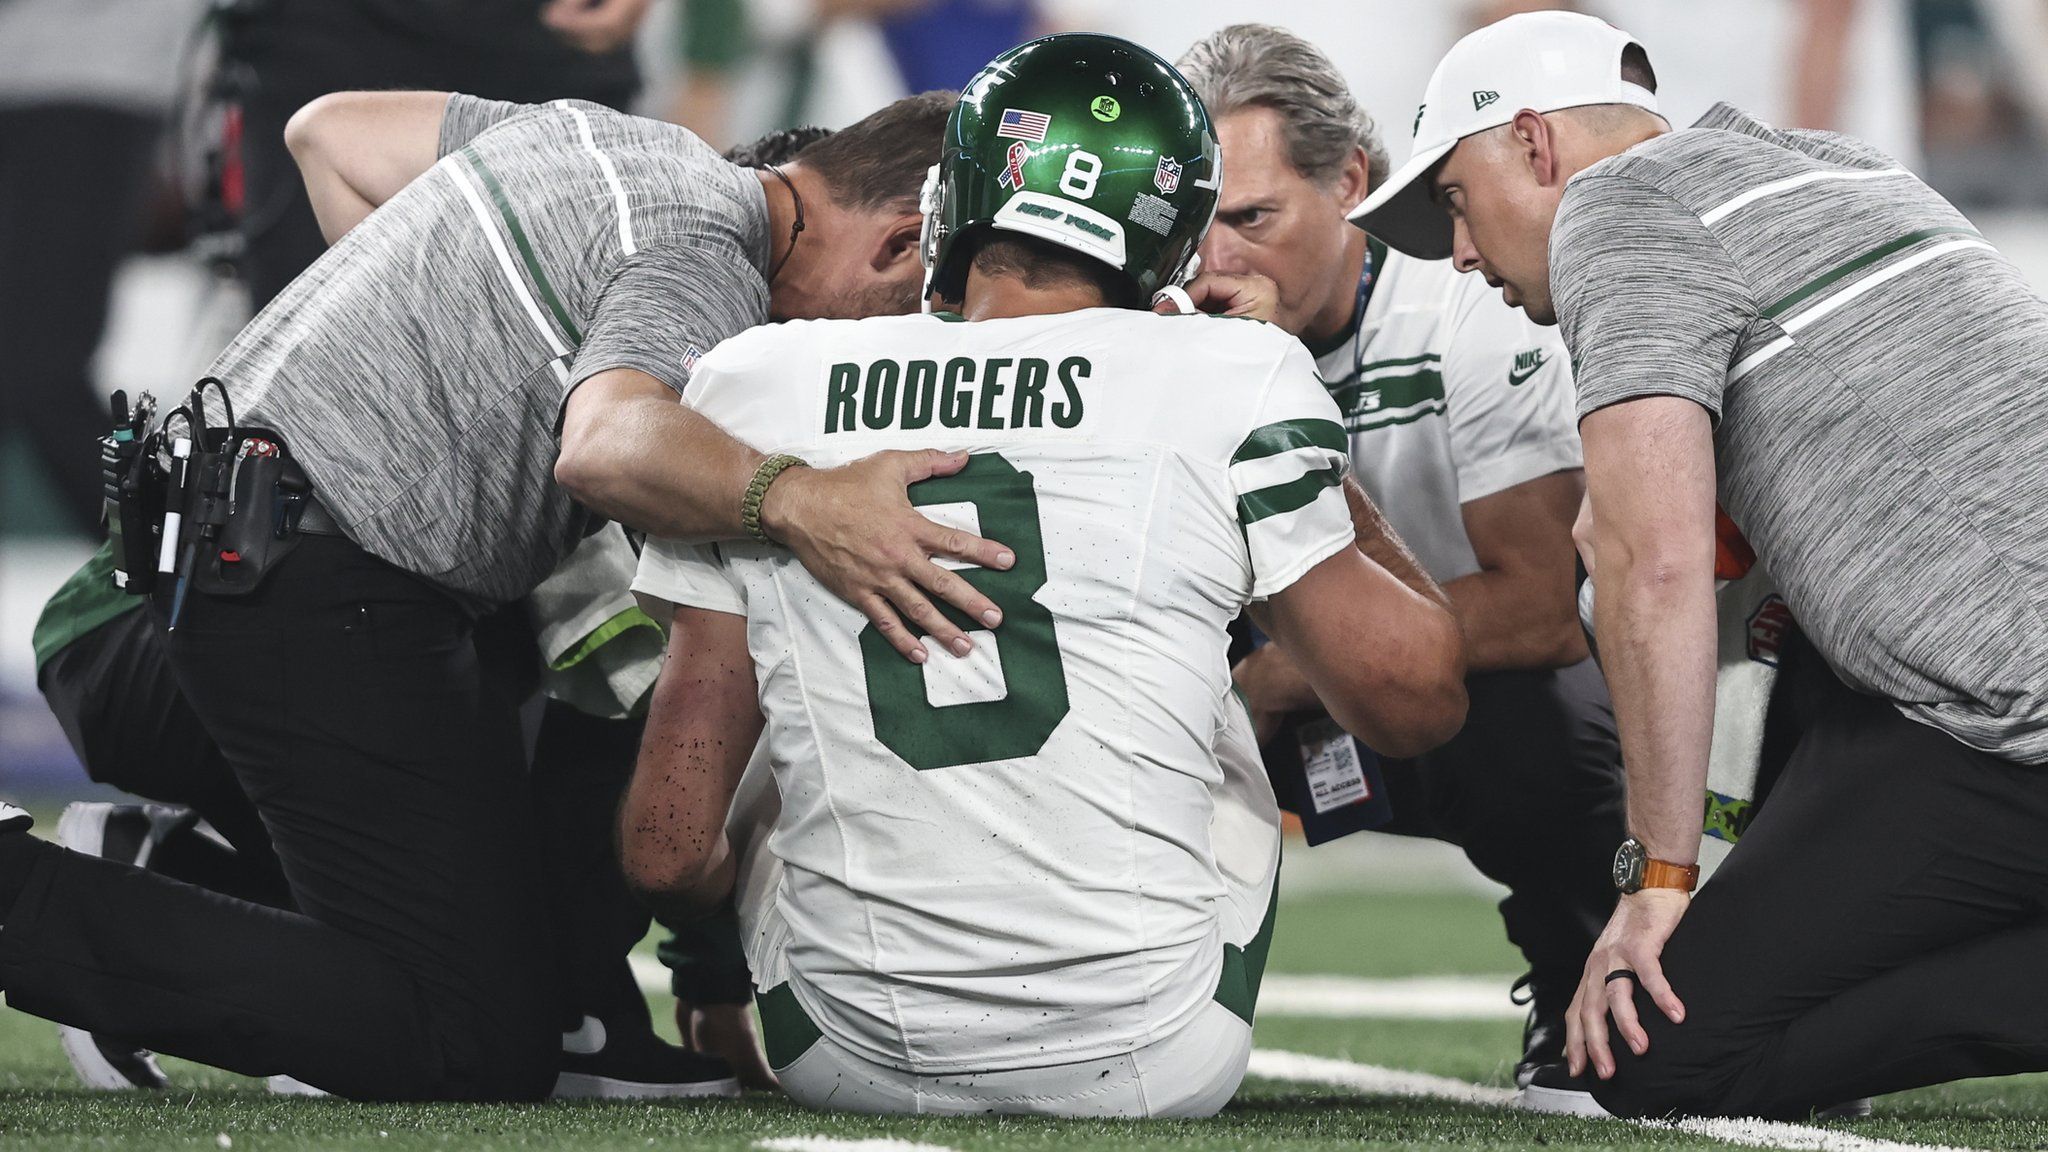 Aaron Rodgers #8 of the New York Jets is looked at by the medical staff